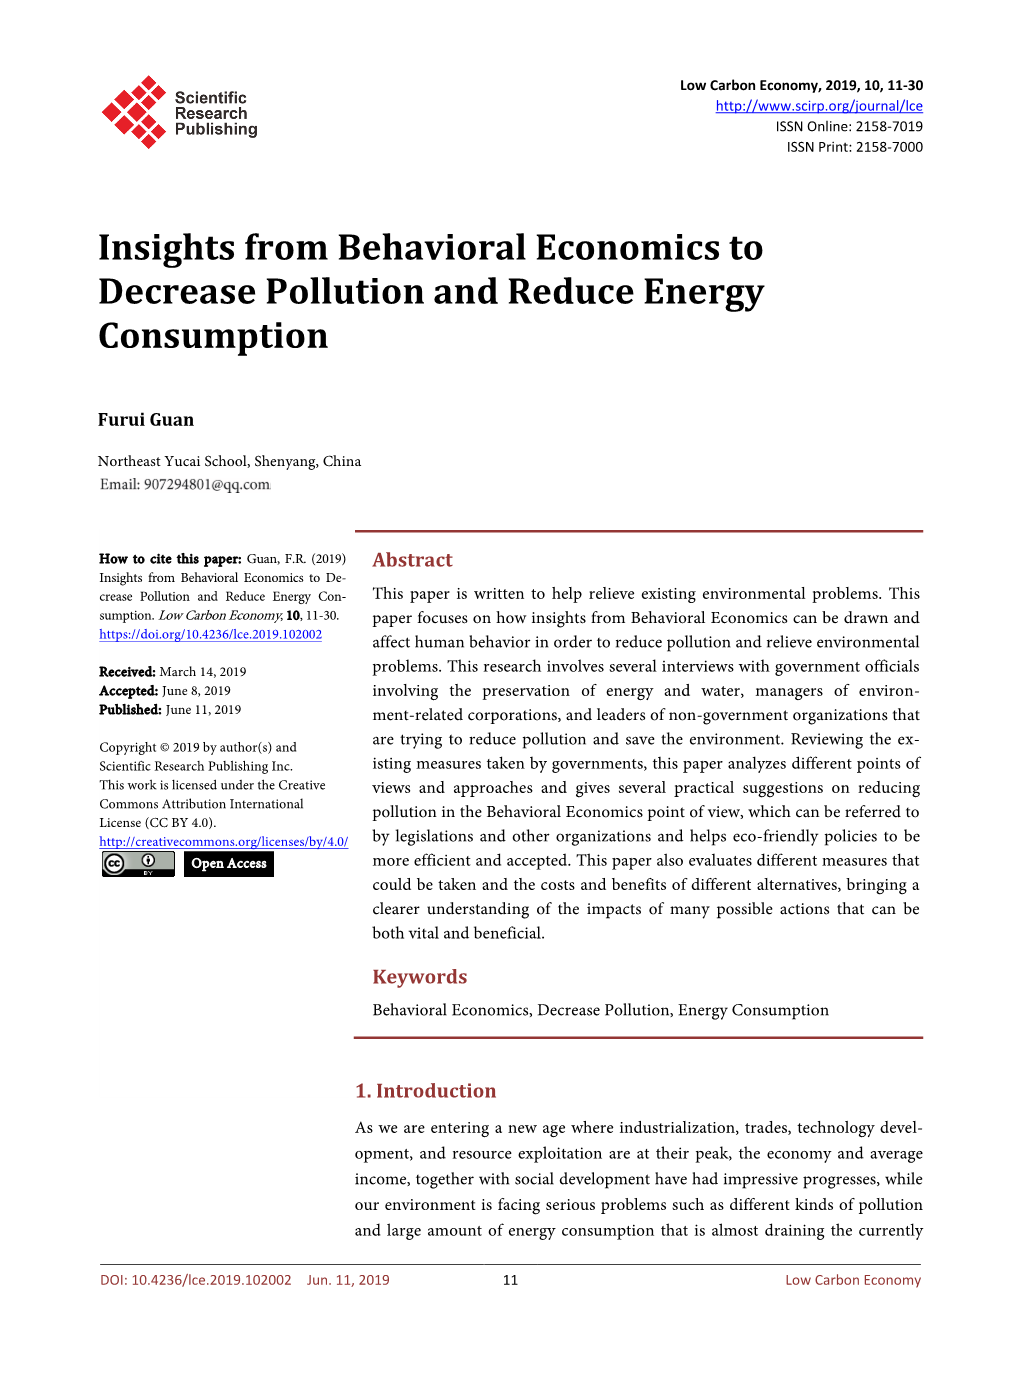 Insights from Behavioral Economics to Decrease Pollution and Reduce Energy Consumption